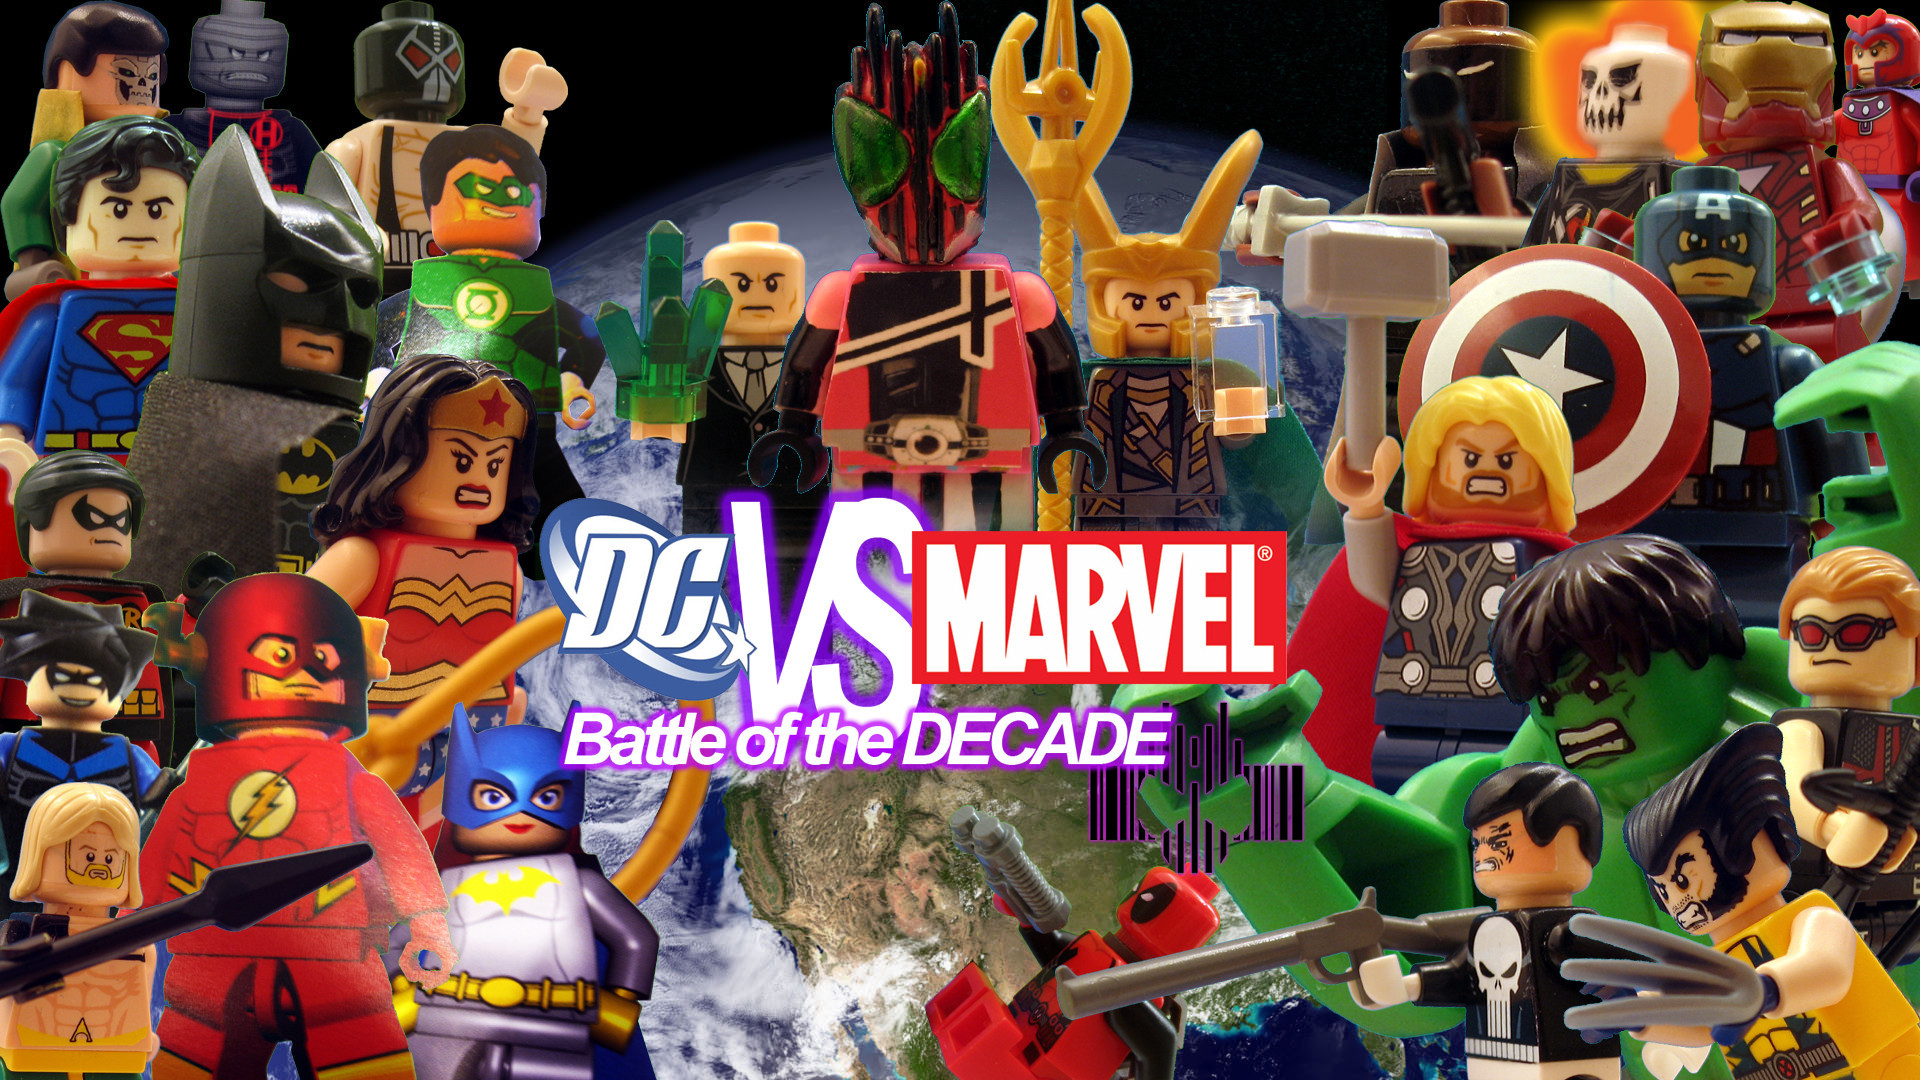 1920x1080 LEGO DC VS MARVEL: Battle of the Decade Wallpaper by Digger318